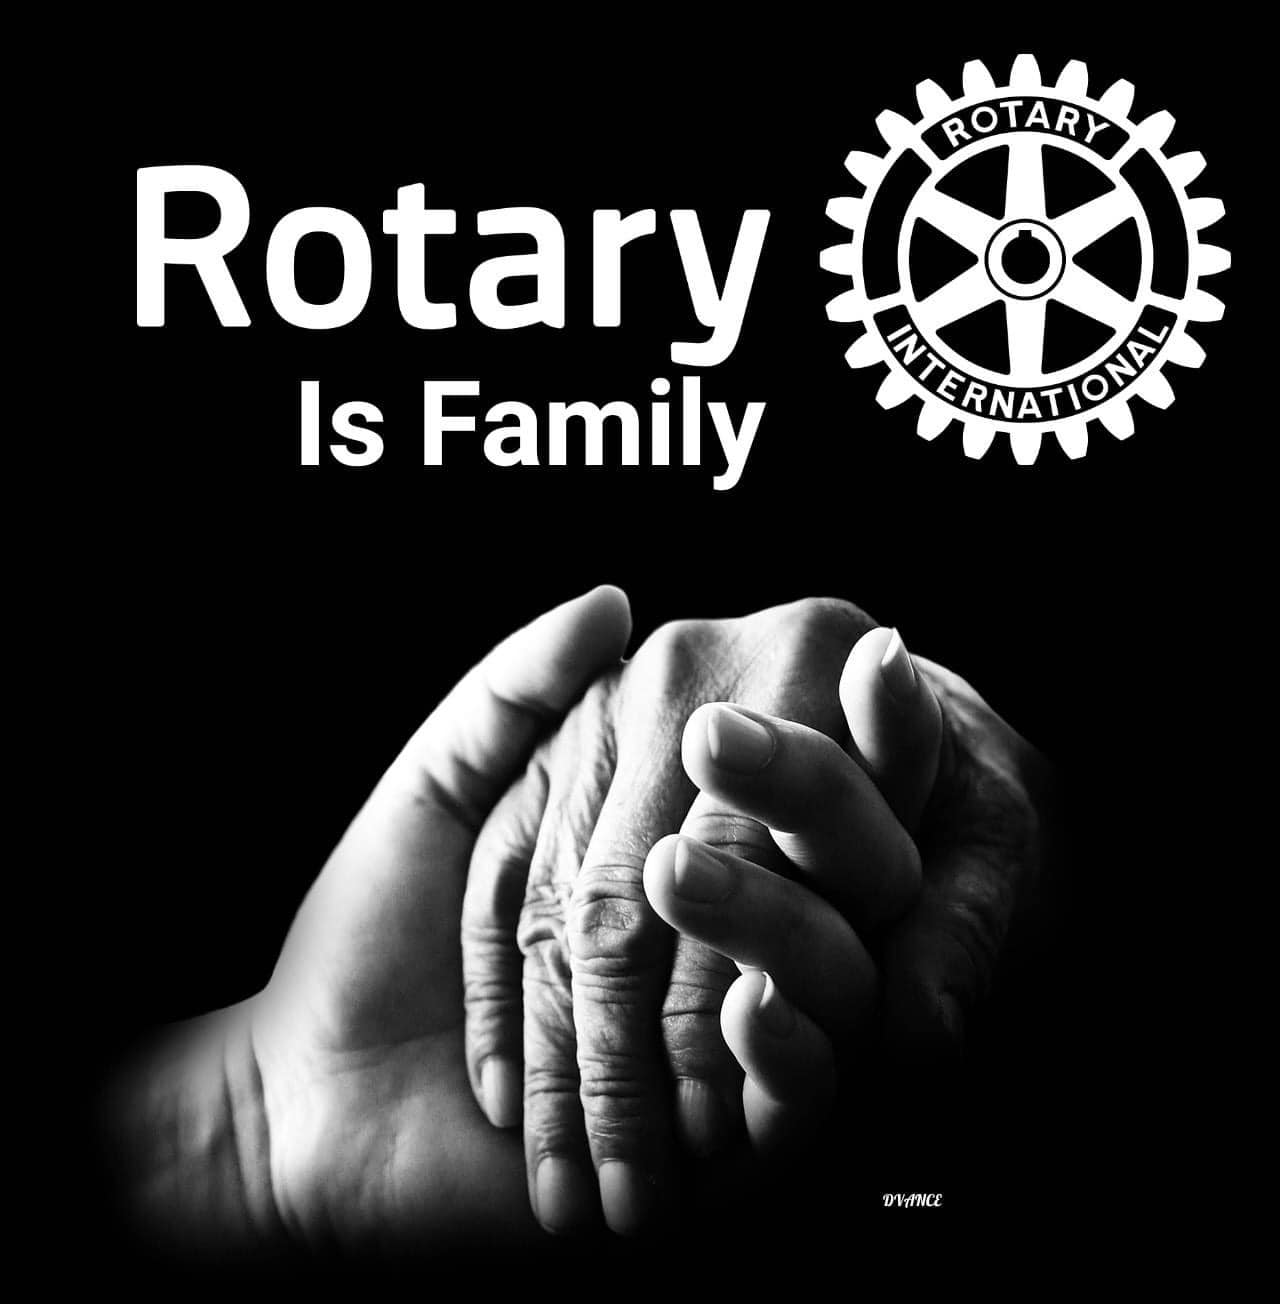 A poster that says rotary is family with two hands holding each other